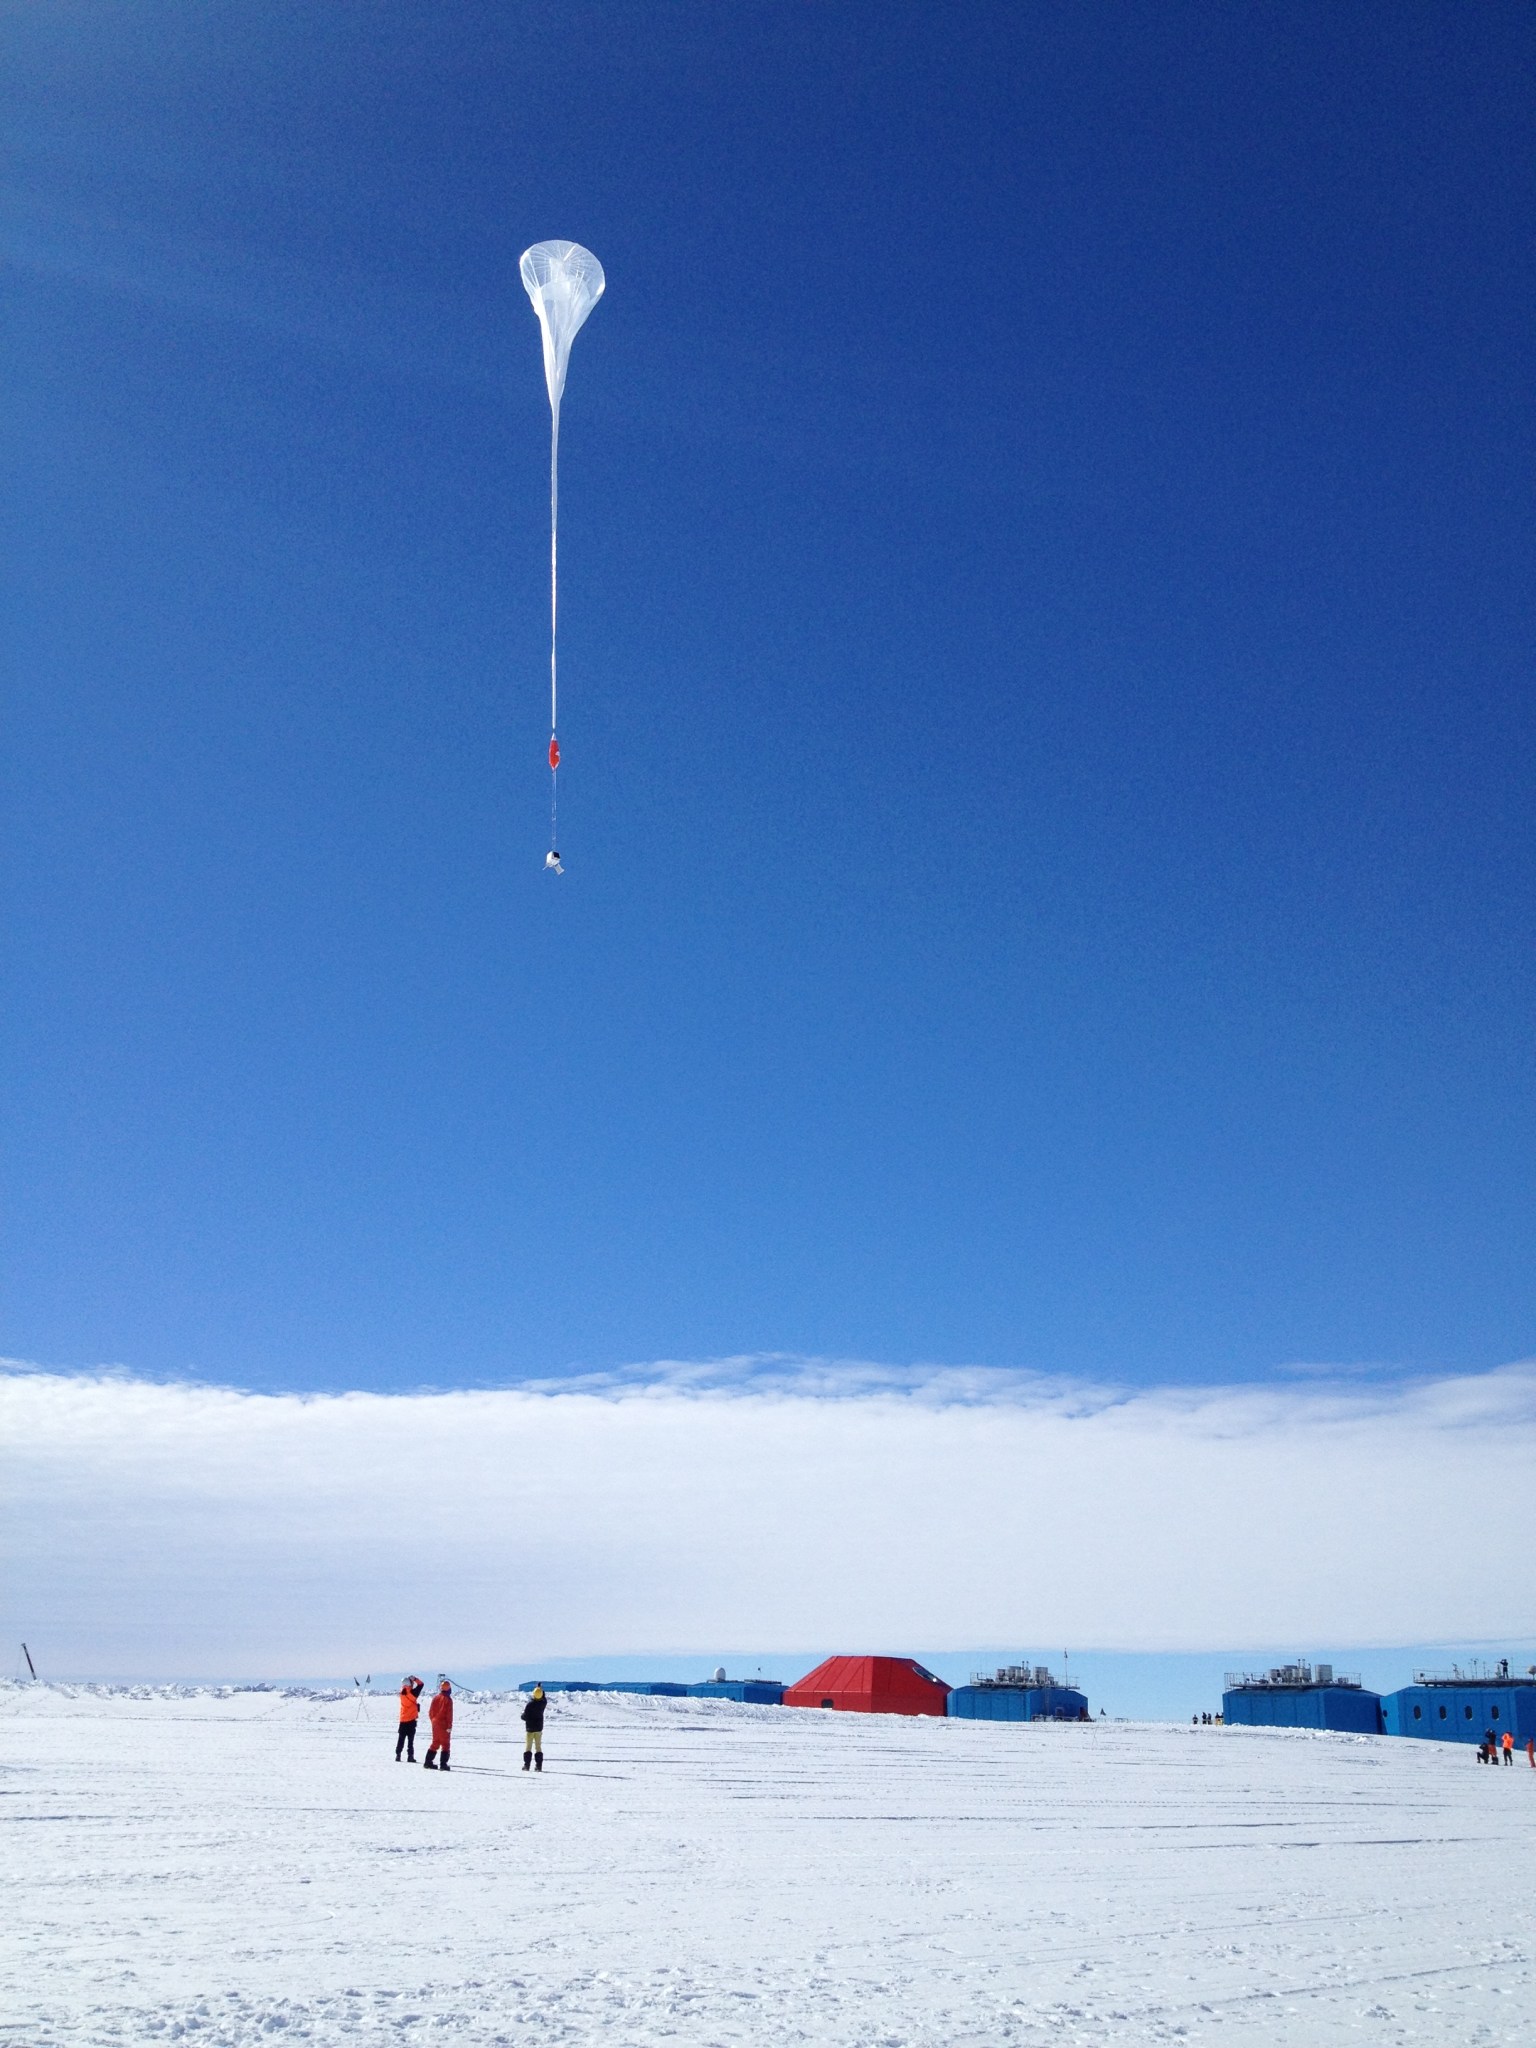 A white balloon floats into the sky as three people watch from the snow-covered ground